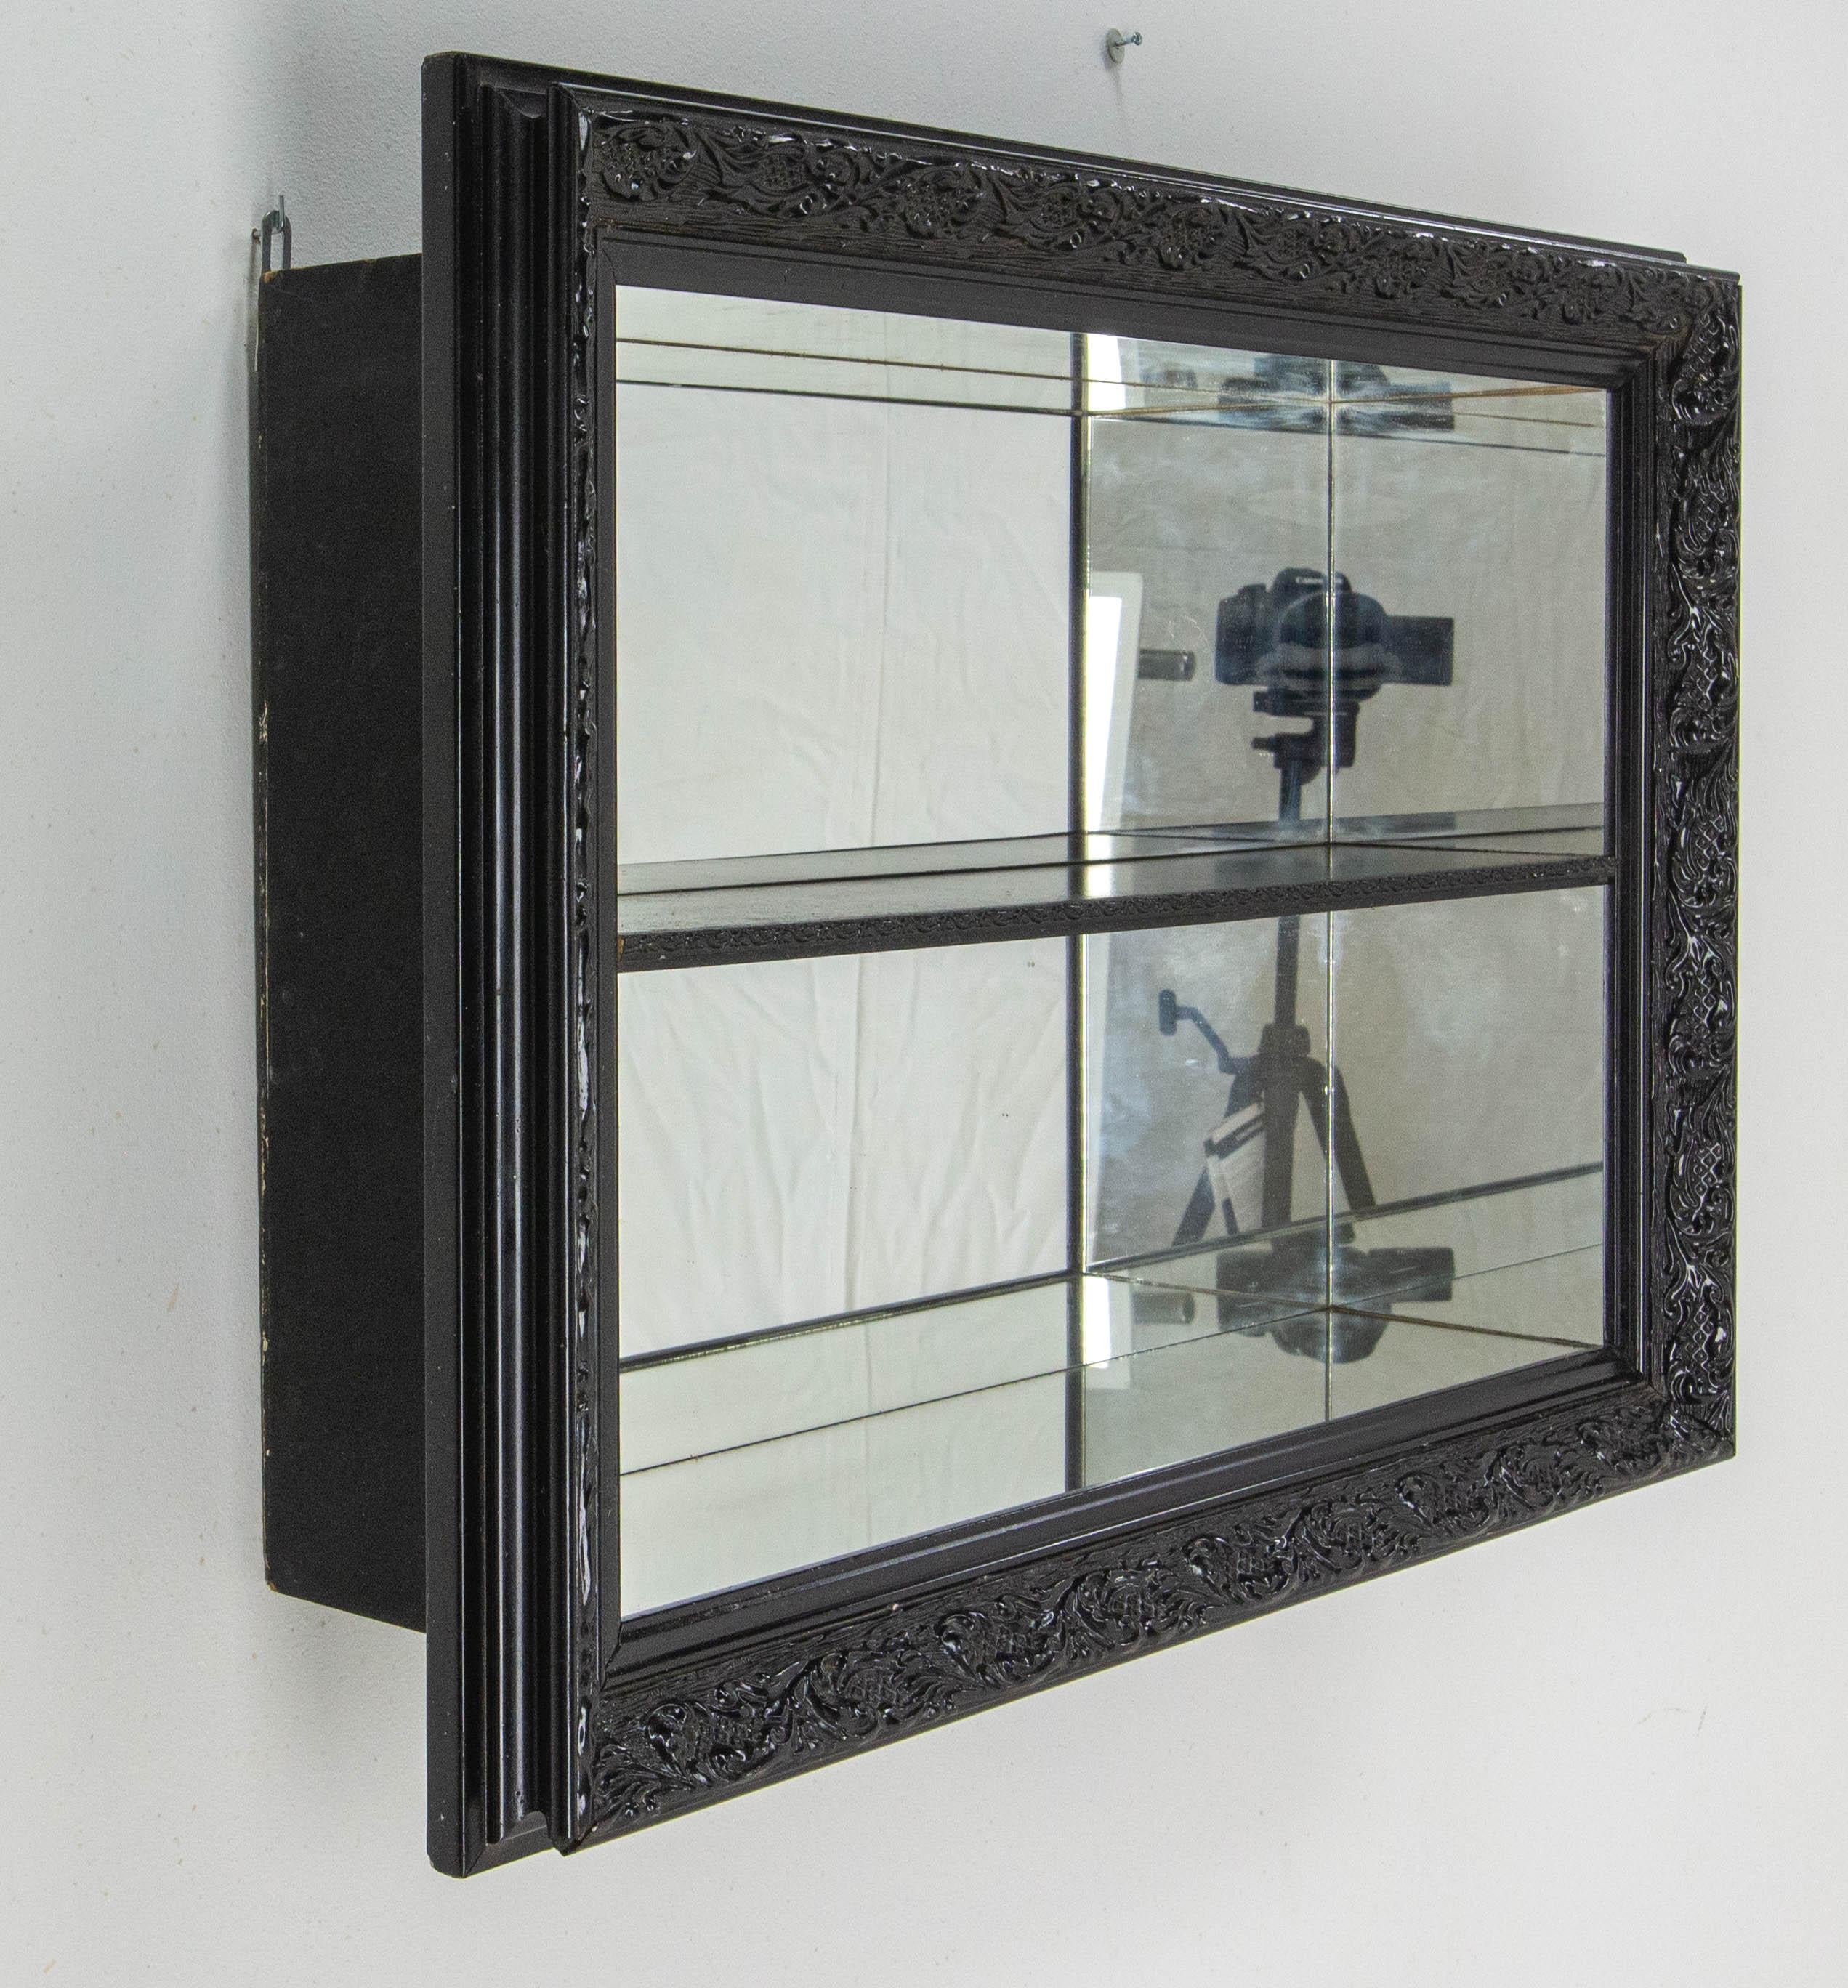 Vitrine Mirrored shelves, French, 
This item was made circa 1960 with a stucco frame in the Louis XV style made circa 1900
Wood shelf
Unsual and very decorative
Dimensions inside: D 4.53 in. W 22.64 in. P 11.5 H 7.09 in. x2 (P 11.5 cm L 57.5 cm